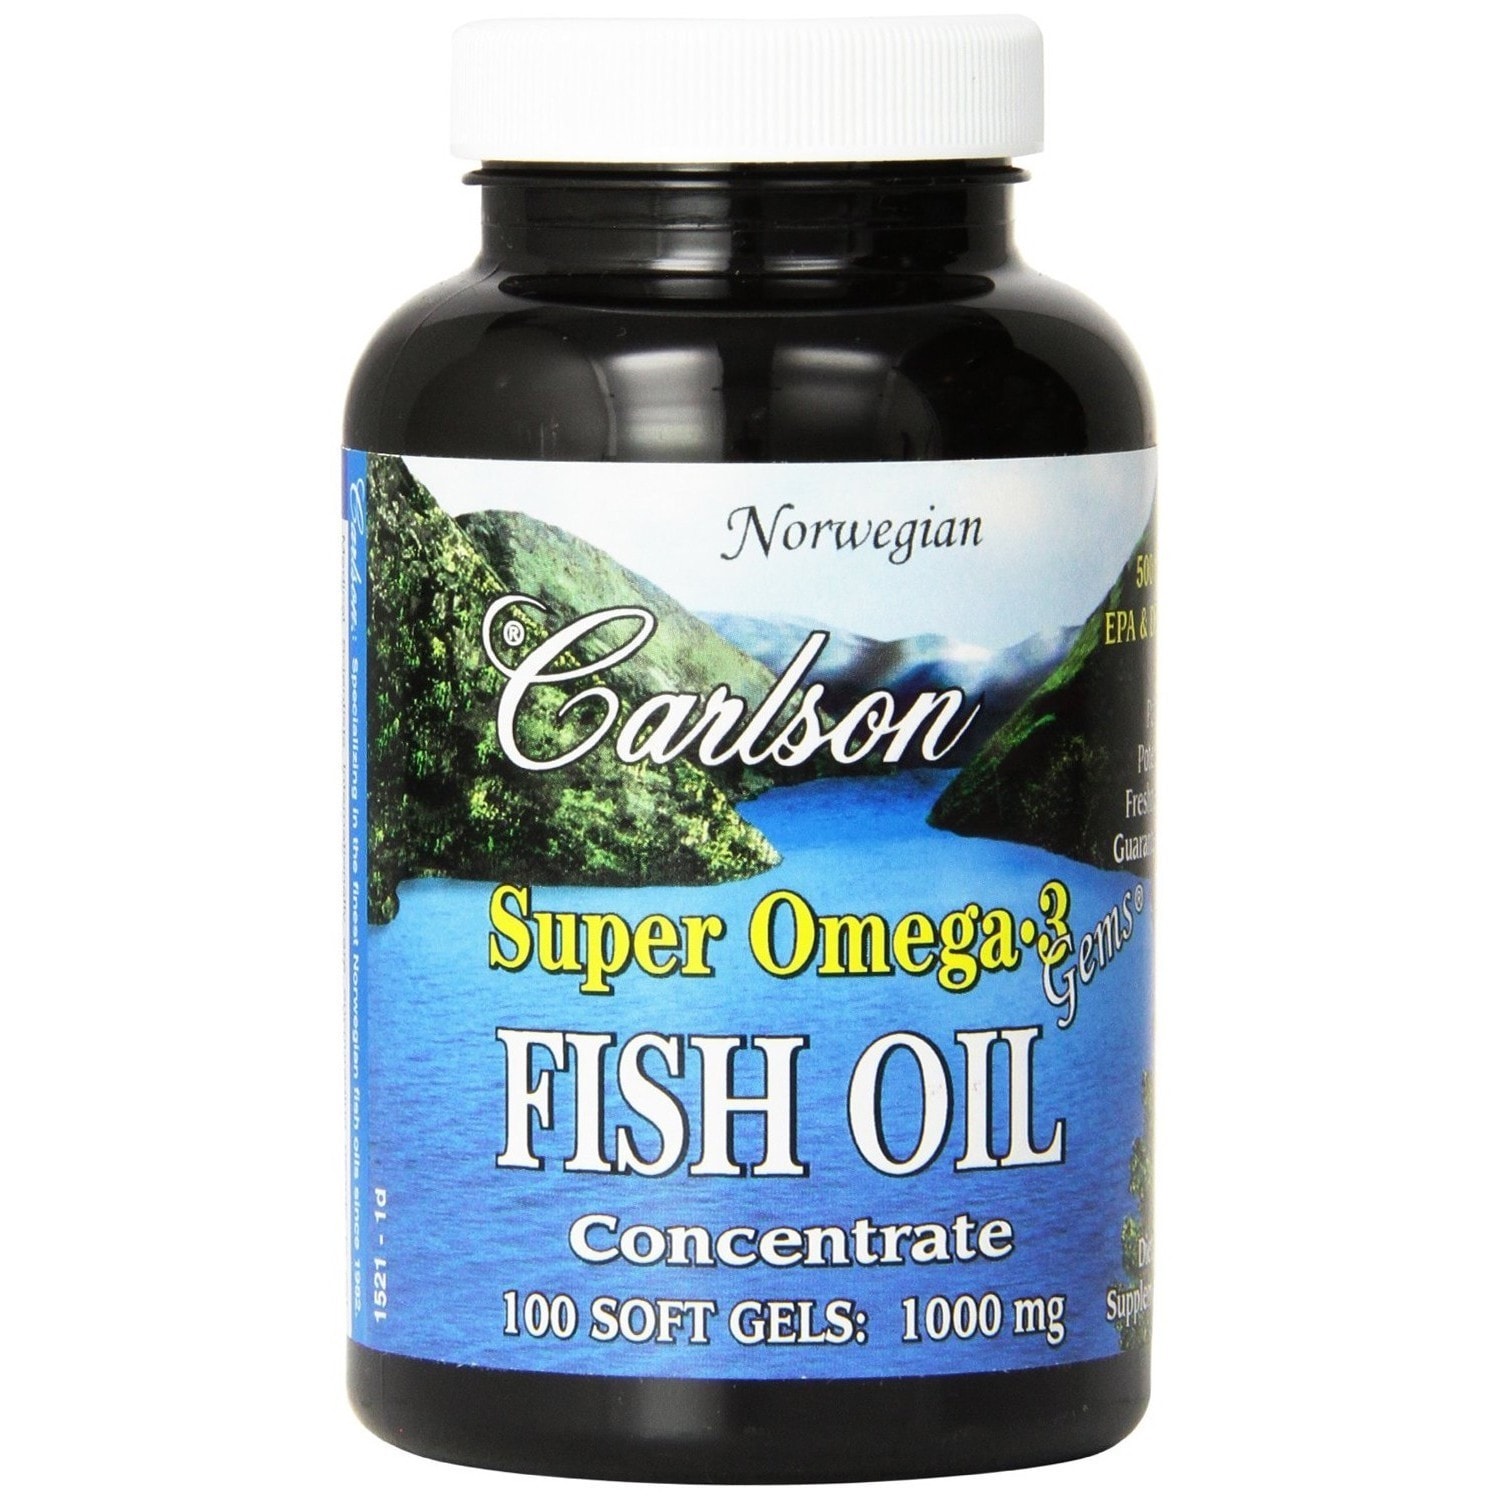 Omega 3 Fish Oil Concentrate 1000. Омега-3 Norwegian Fish Oil Cod Liver Oil. Омега-3 1000 Норвегия. Carlson super Omega 1600мг Fish Oil. Концентрат 1000